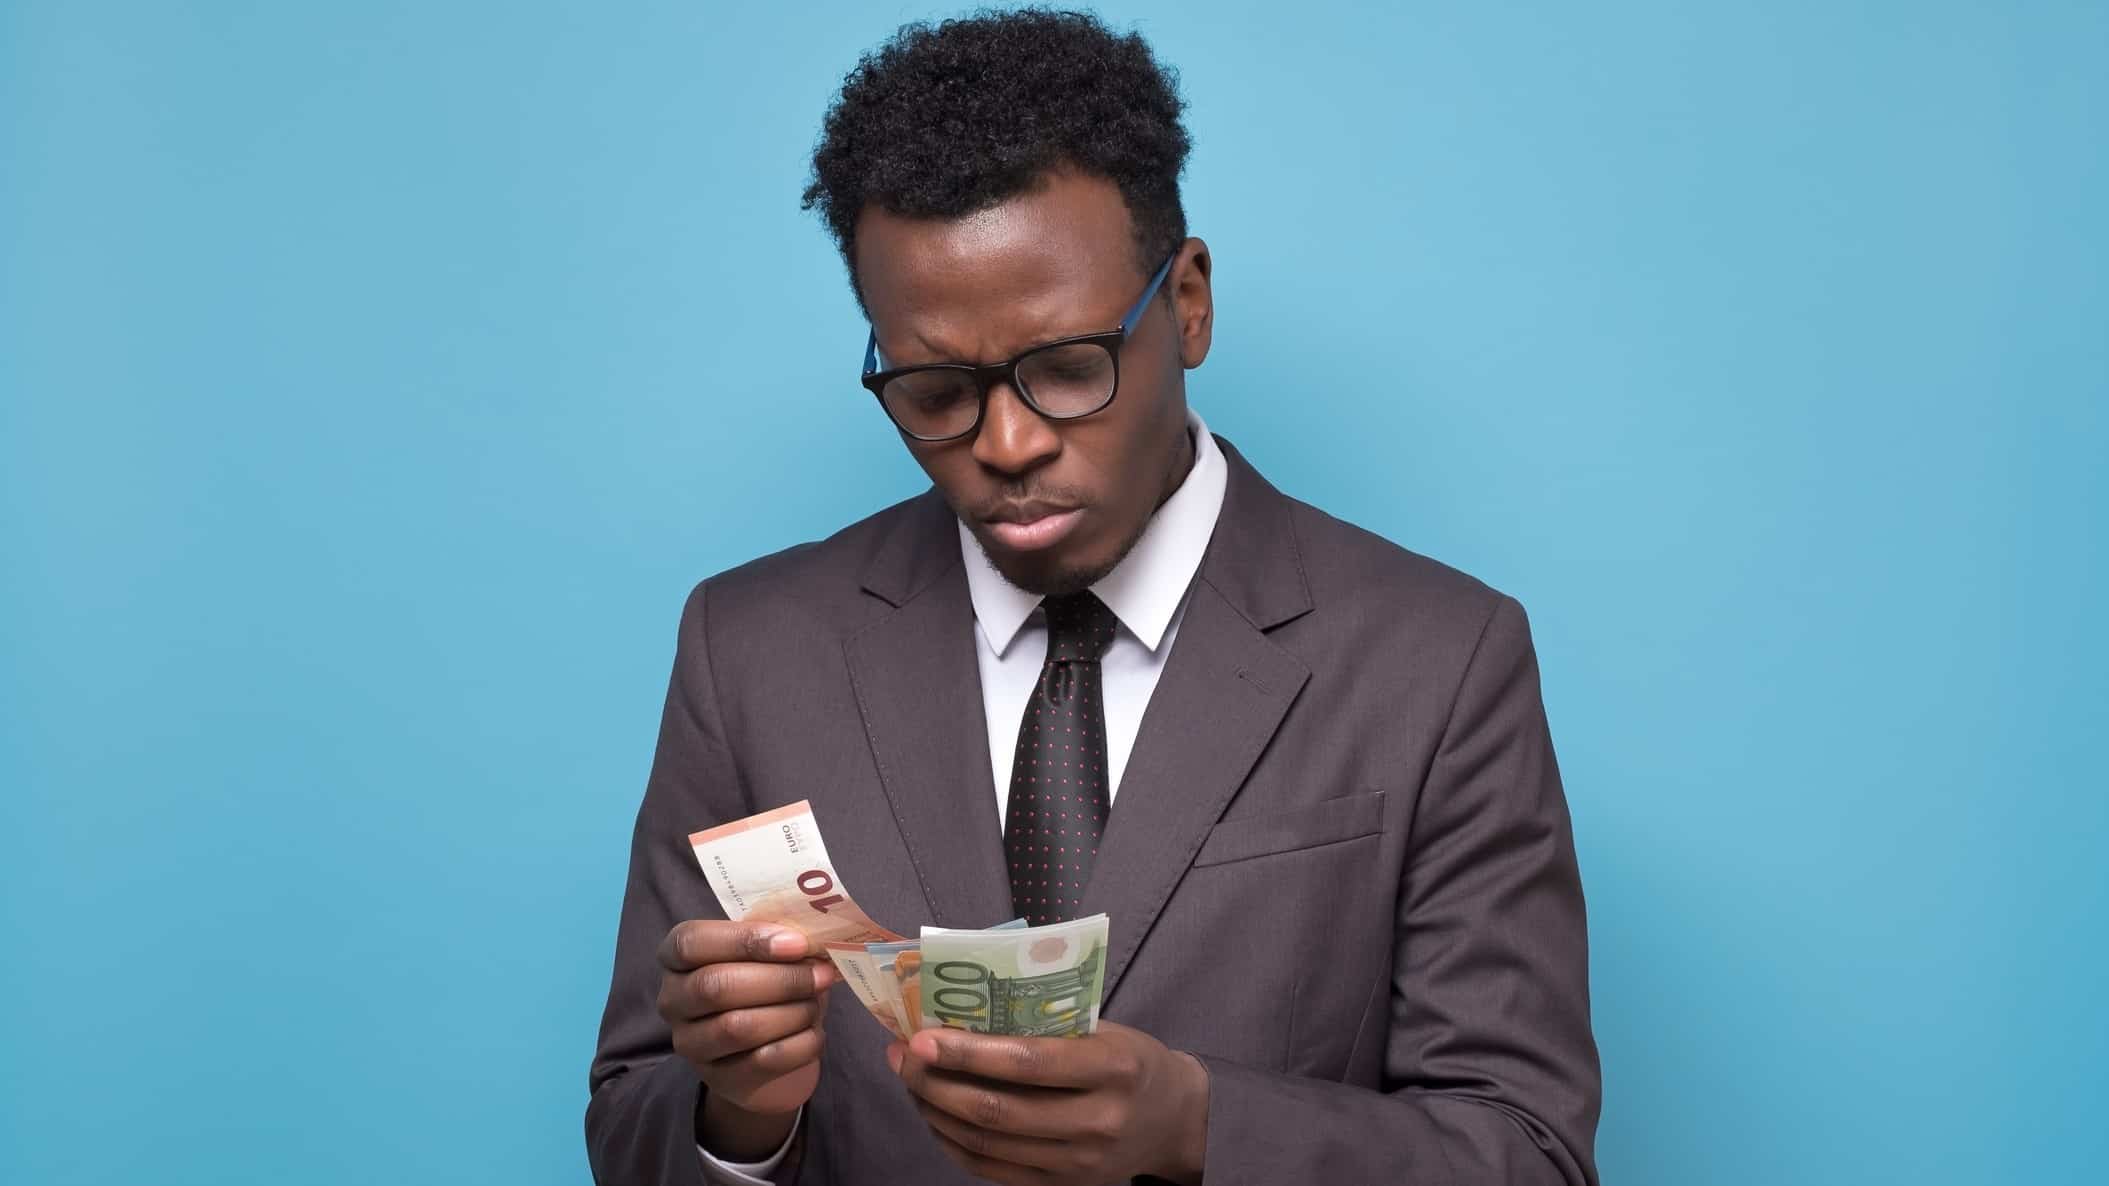 a man in a snappy business suit looks disappointed as he counts bank notes in his hand.